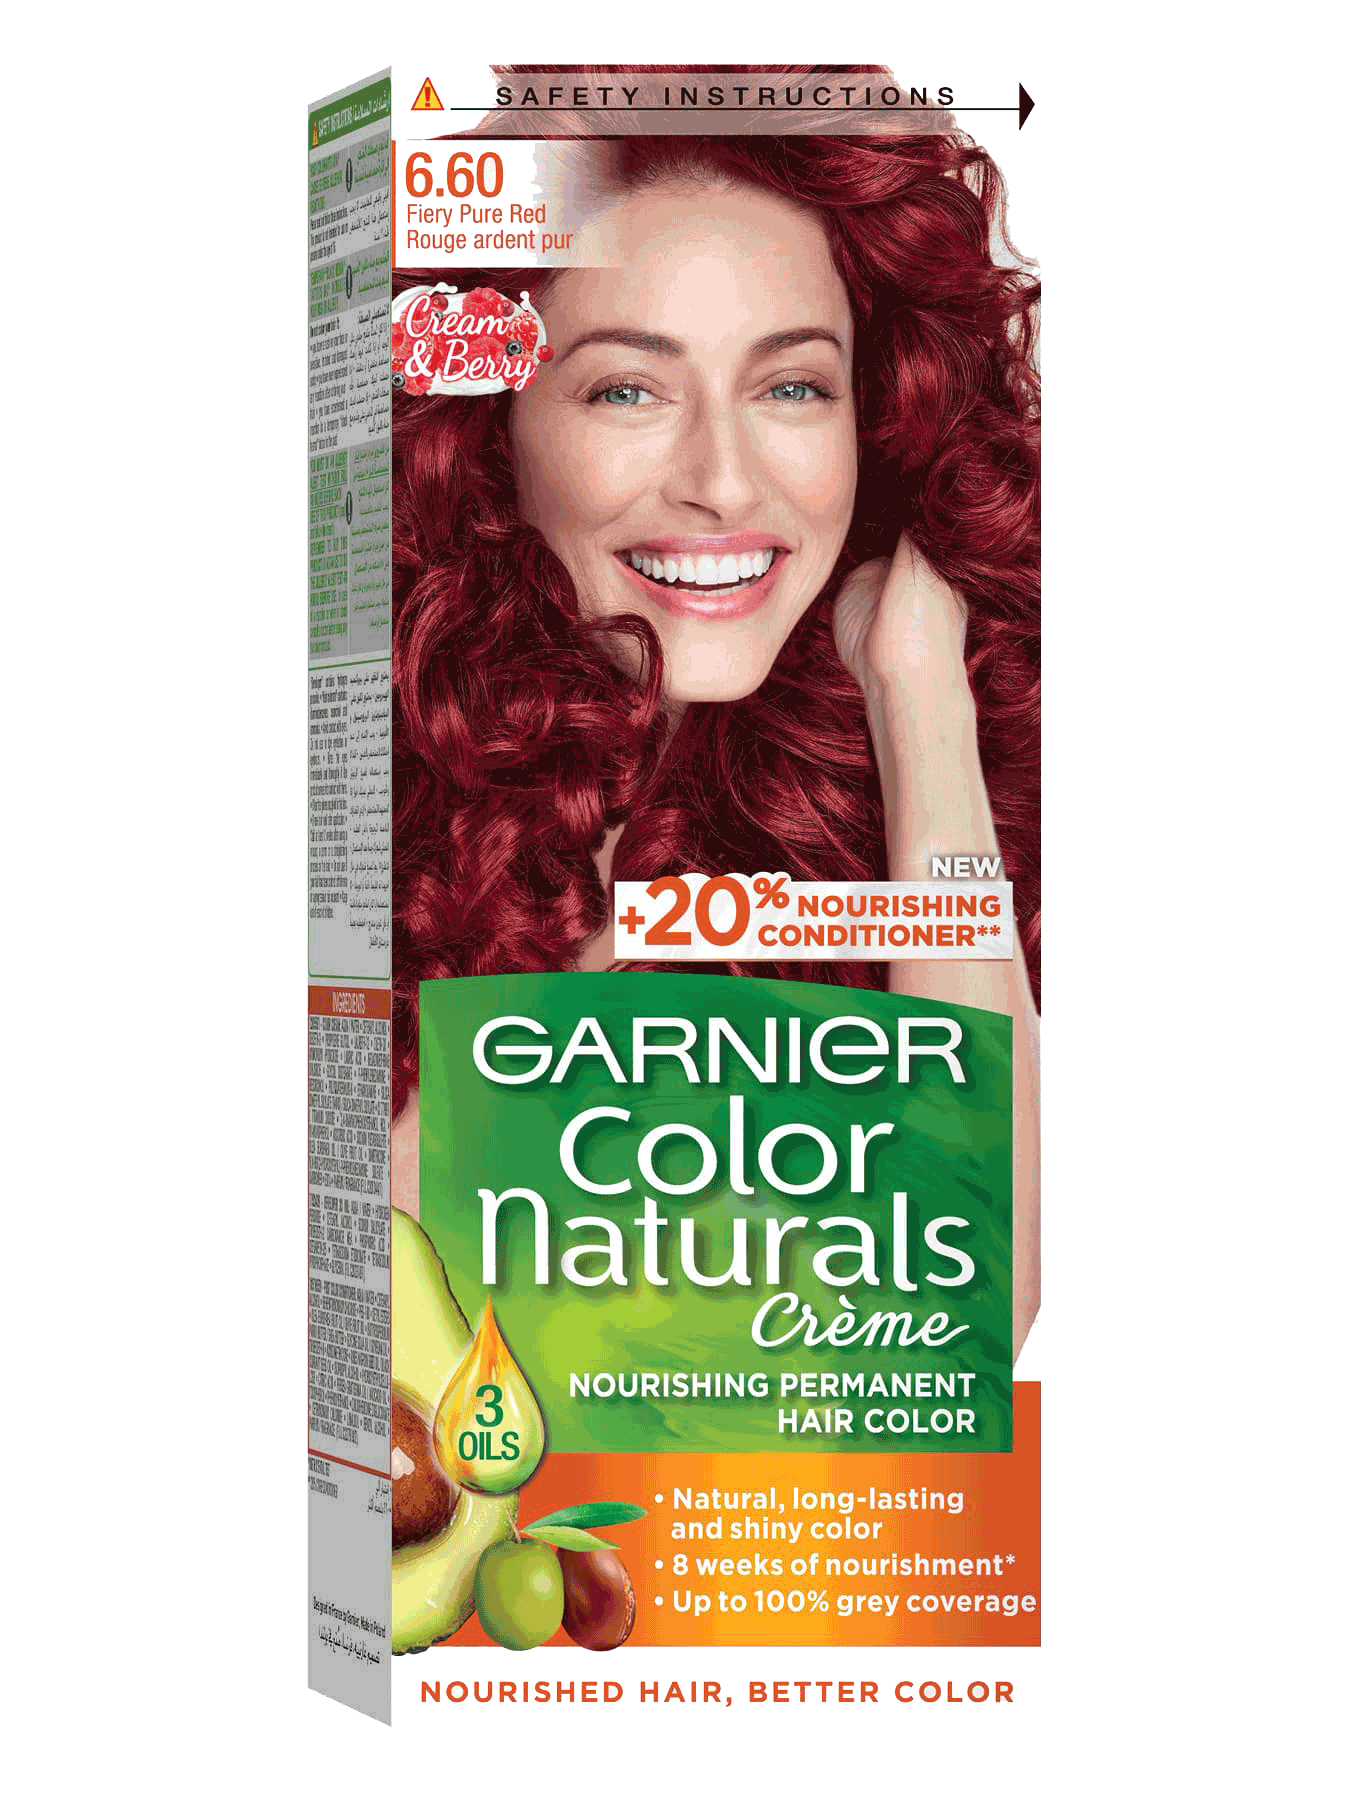 - FIERY PURE RED/ COLOR NATURALS/ GARNIER